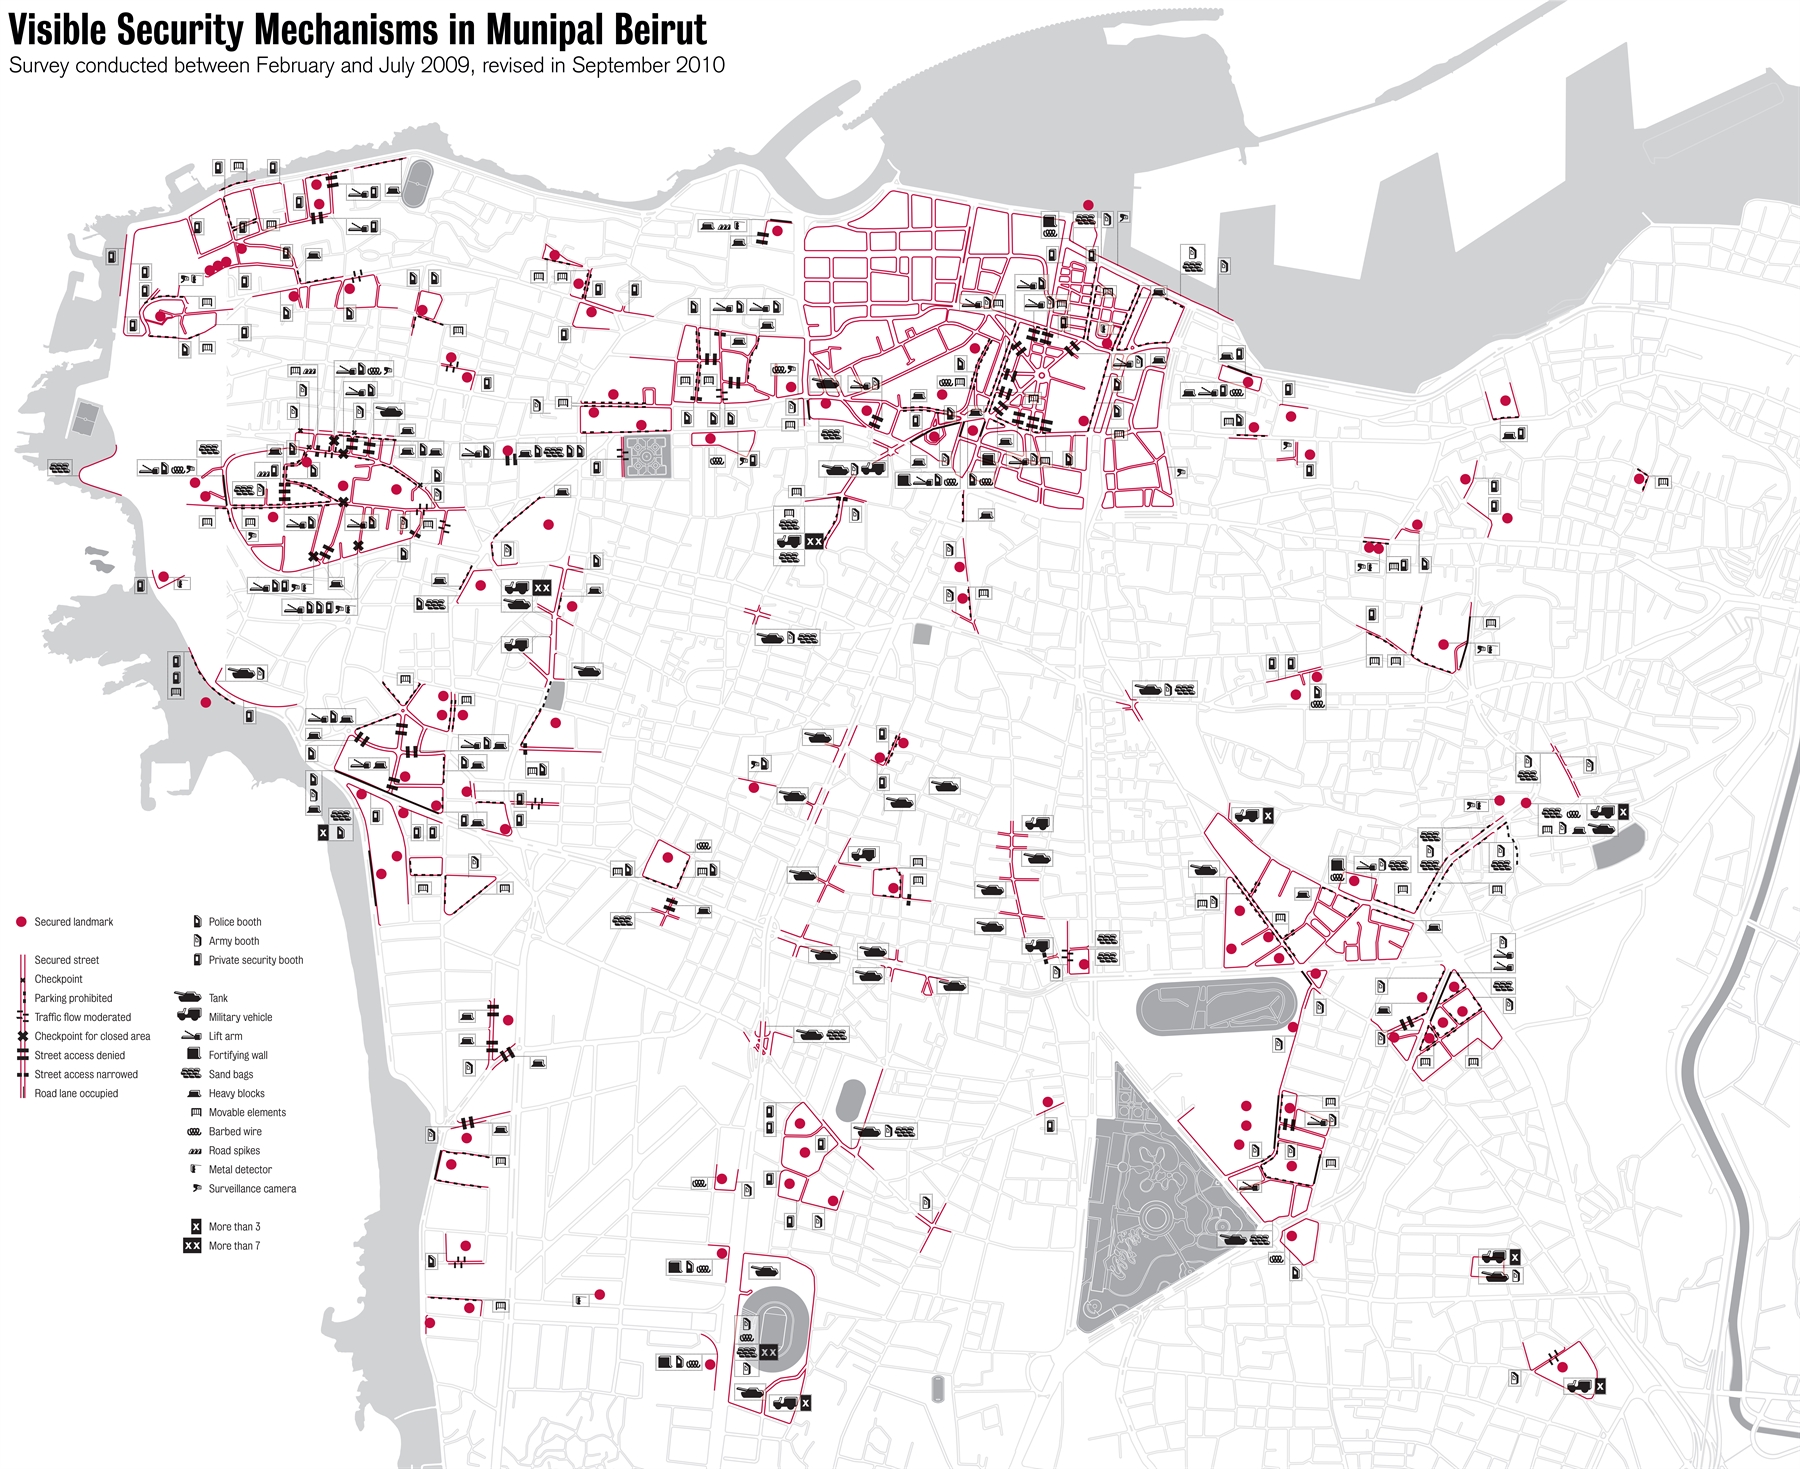 Map showing the visible security mechanisms in Municipal Beirut, published several times between 2010 and 2015.